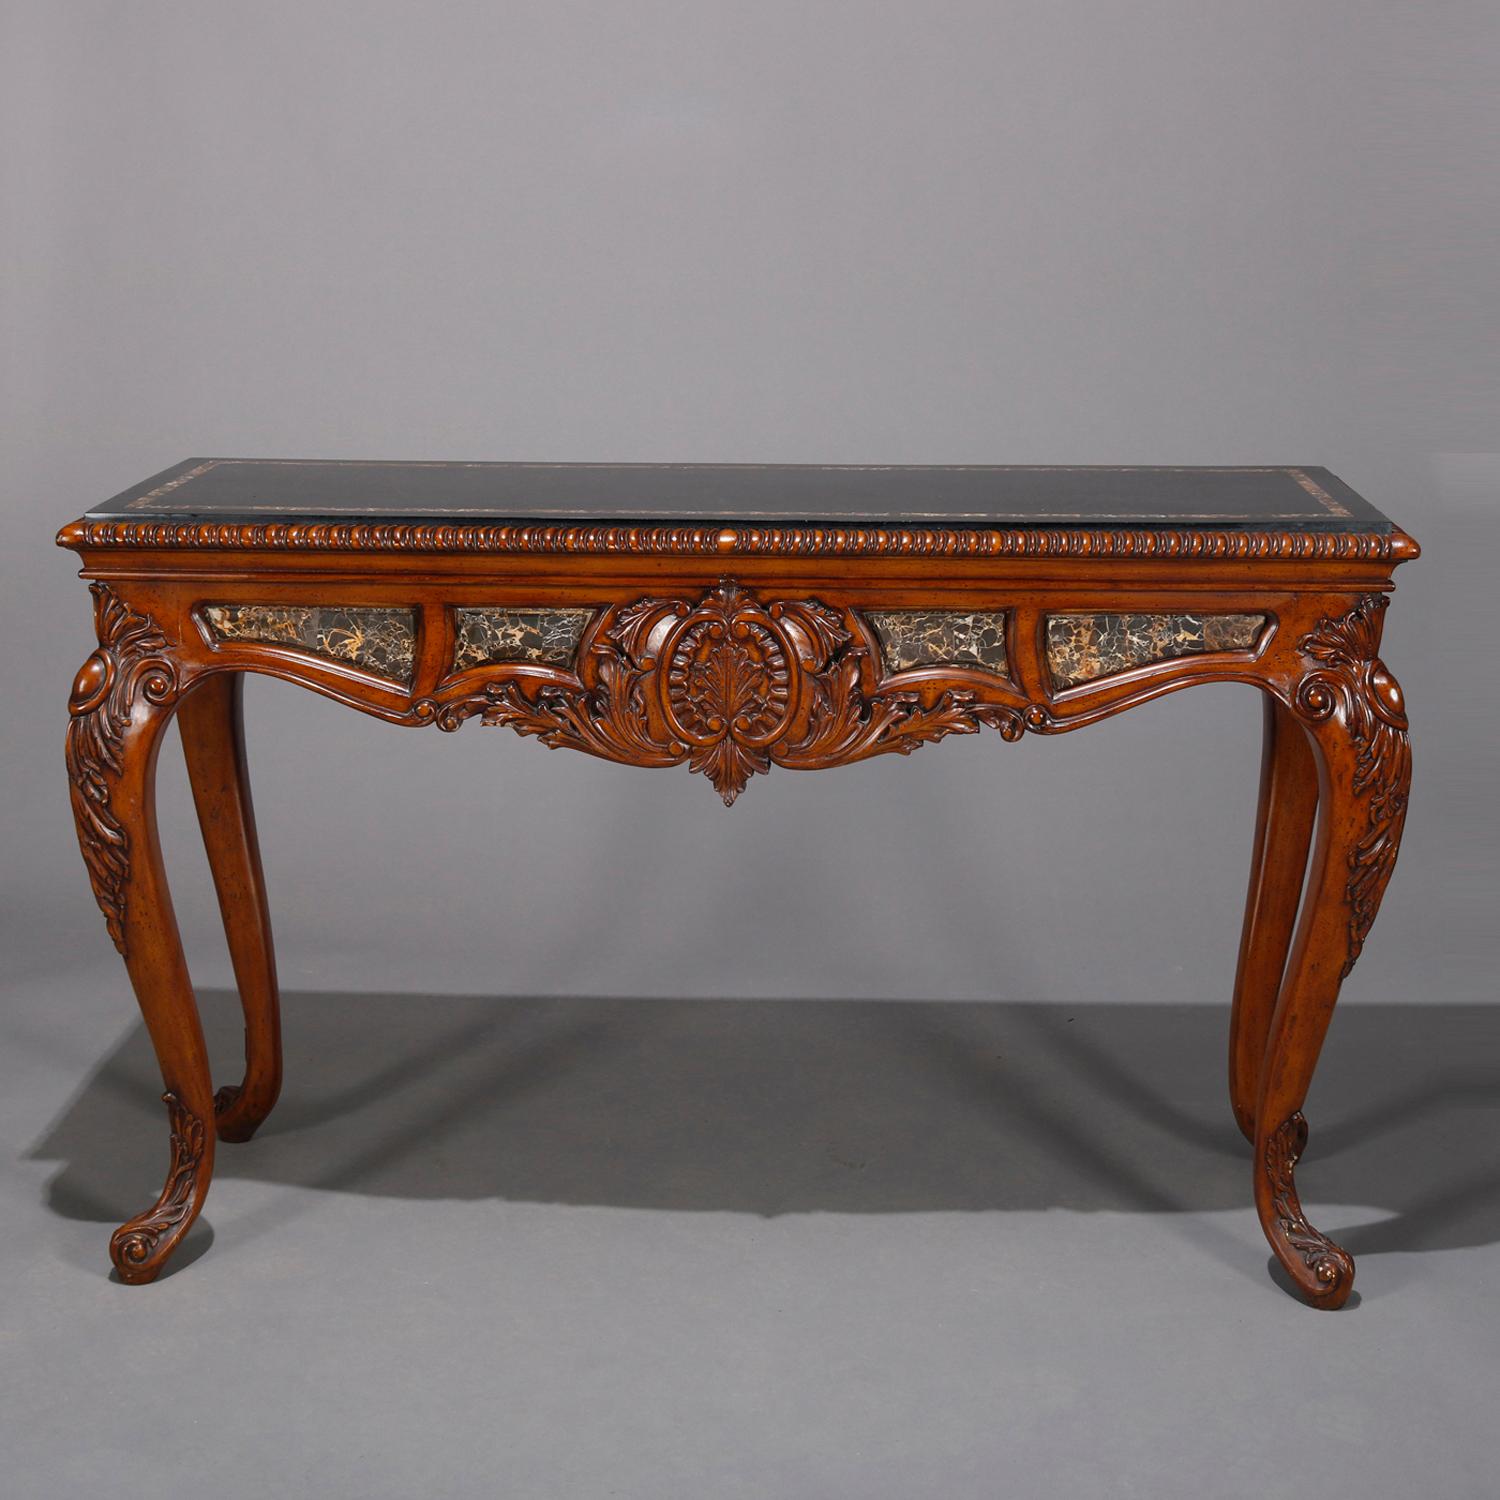 Vintage French style sofa table offers mahogany construction with faux marble top with gadrooned edge surmounting base with acanthus carved skirt with faux marble reserves, raised on cabriole legs having foliate caved knees and scroll feet, 20th